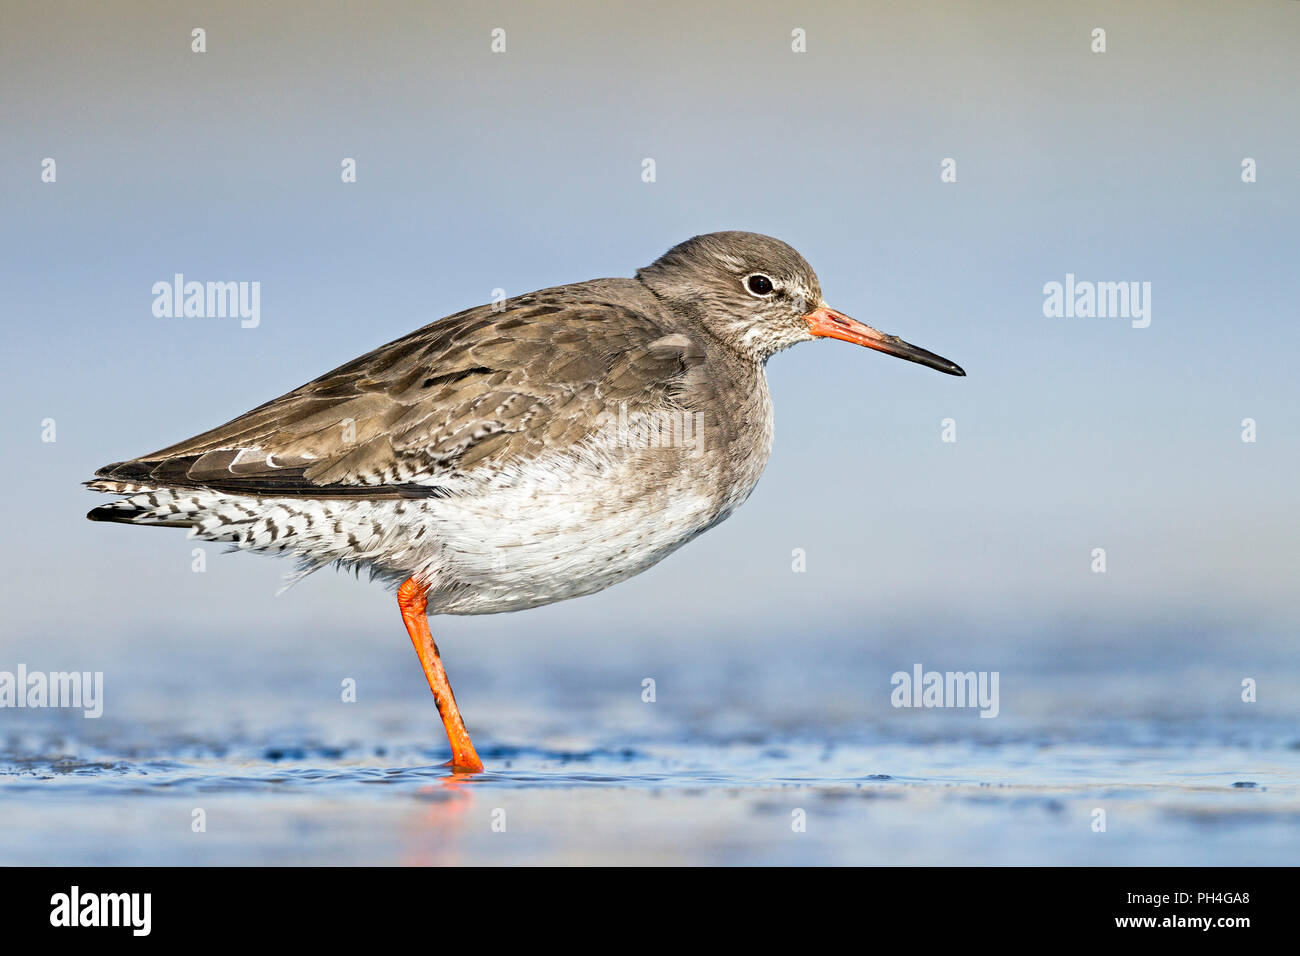 Common Redshank (Tringa totanus) in non-breeding plumage standing in shallow water. Germany Stock Photo